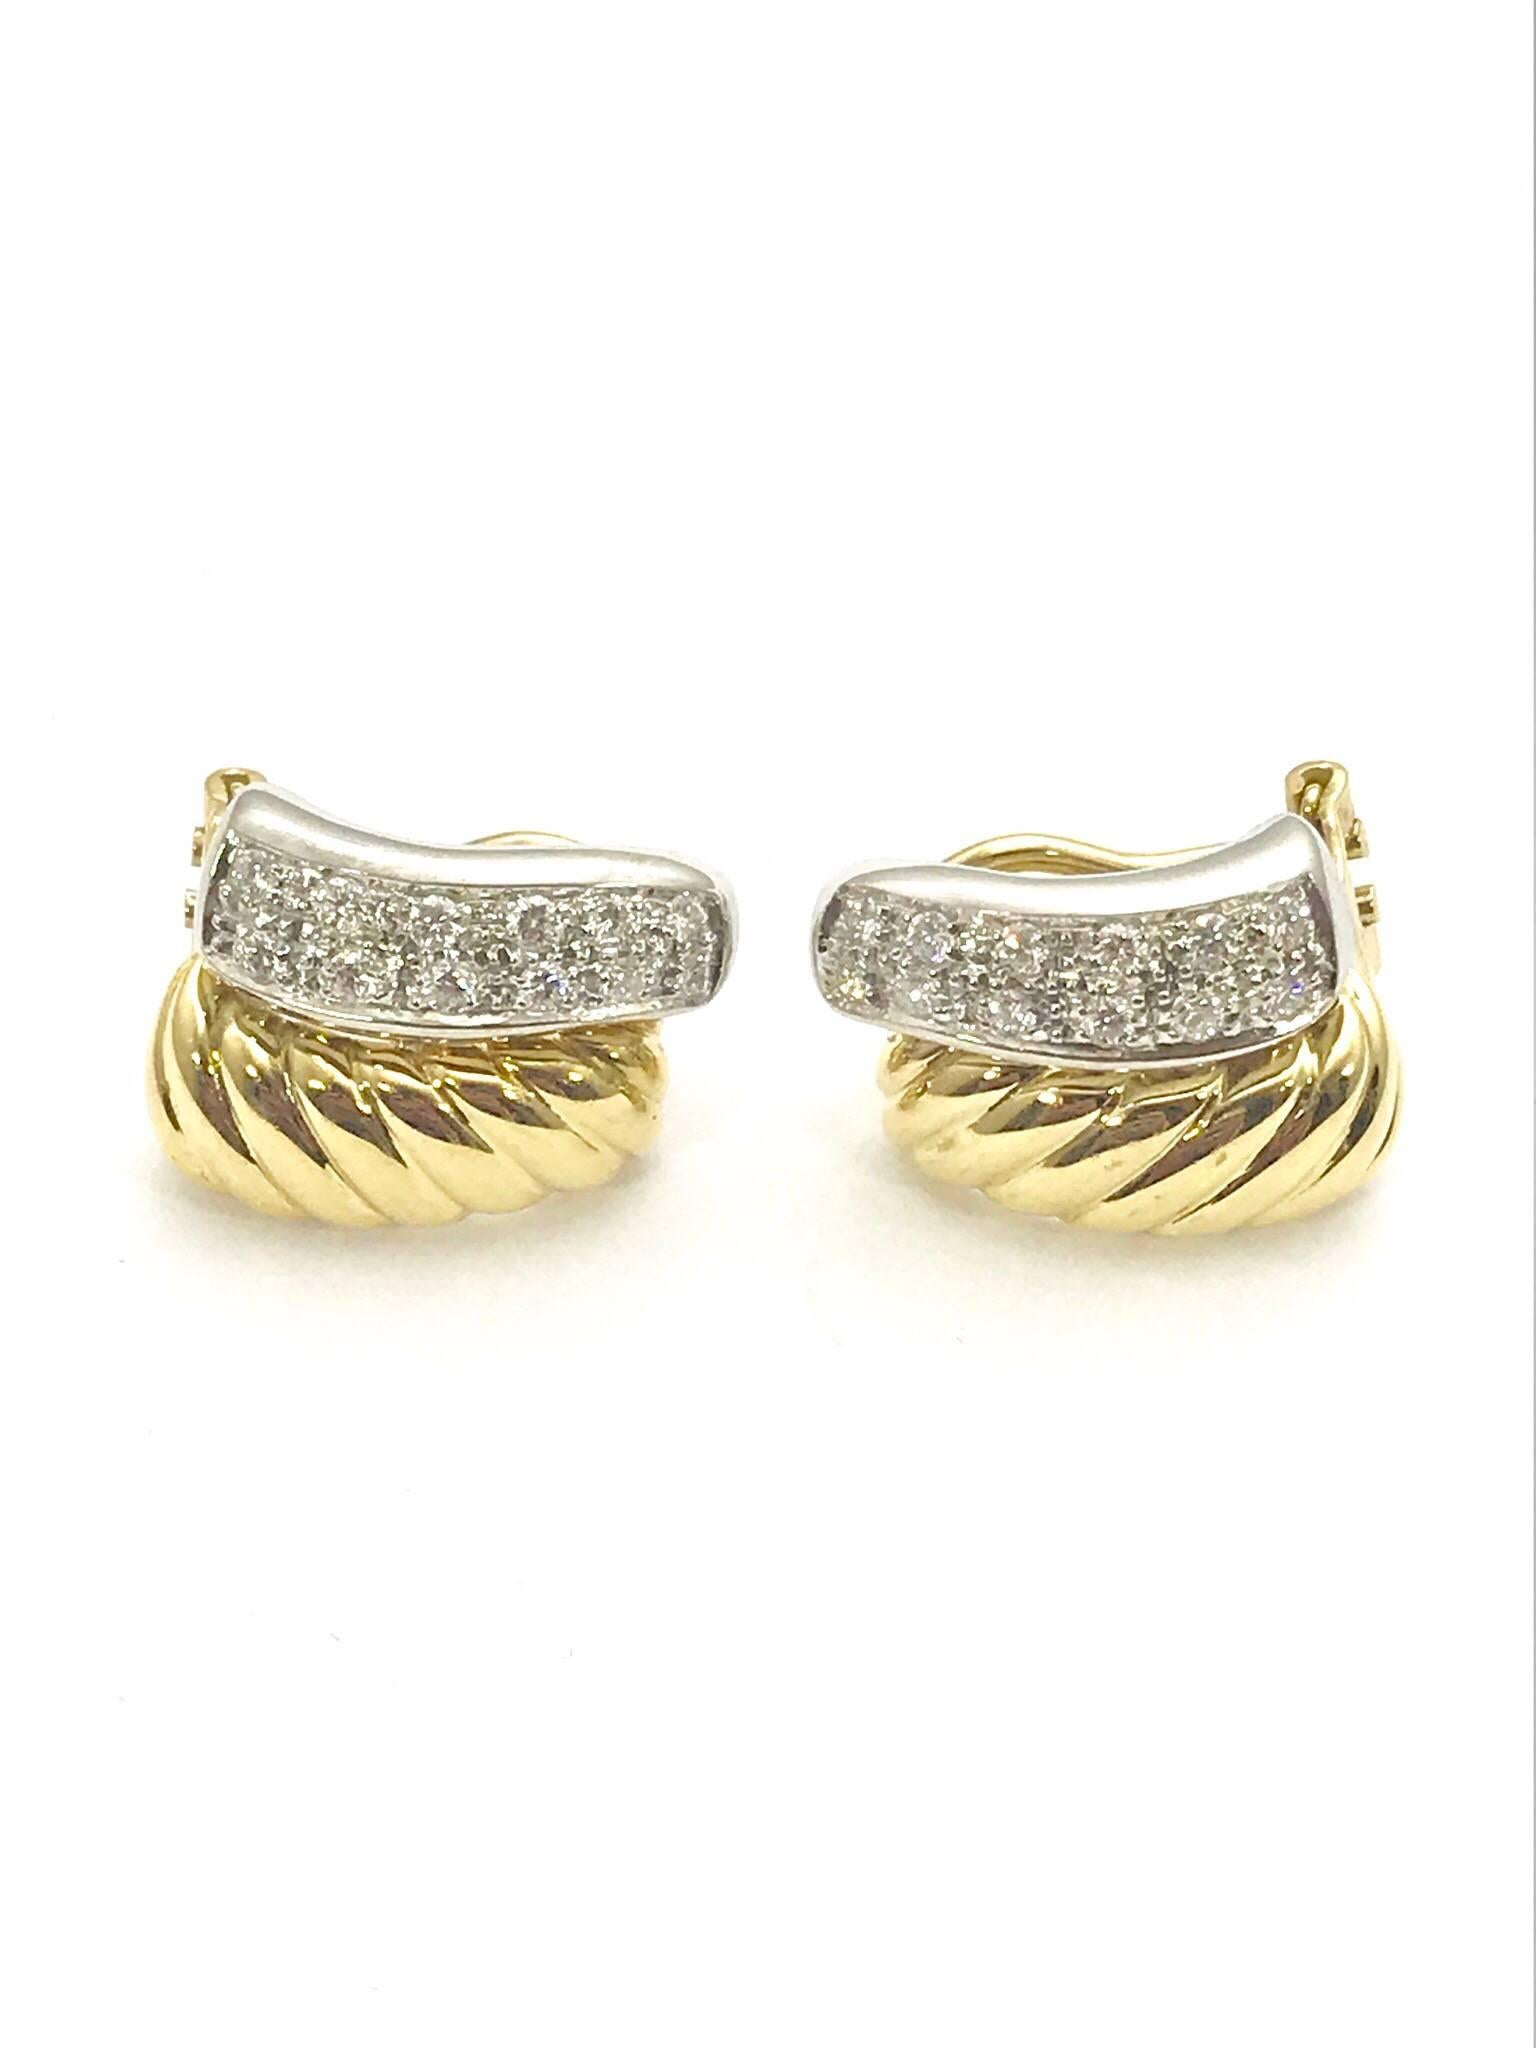 Women's or Men's Diamond and Two-Tone Gold Clip and Post Earrings